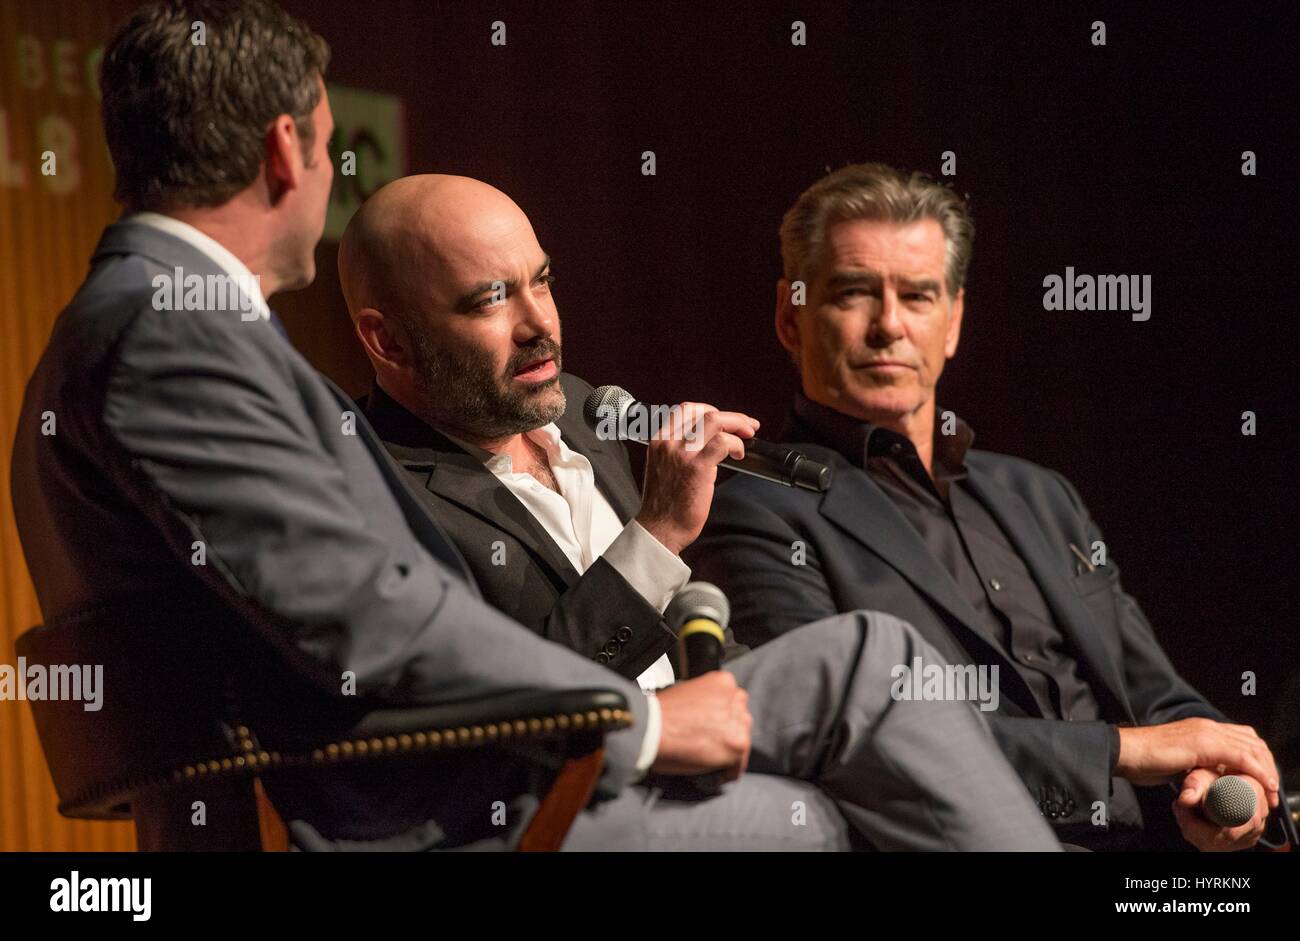 LBJ Presidential Library Director Mark Updegrove (left), author Philipp Meyer, and actor Pierce Brosnan discuss the new AMC television series The Son based on Meyers novel at the LBJ Presidential Library March 13, 2017 in Austin, Texas. Stock Photo